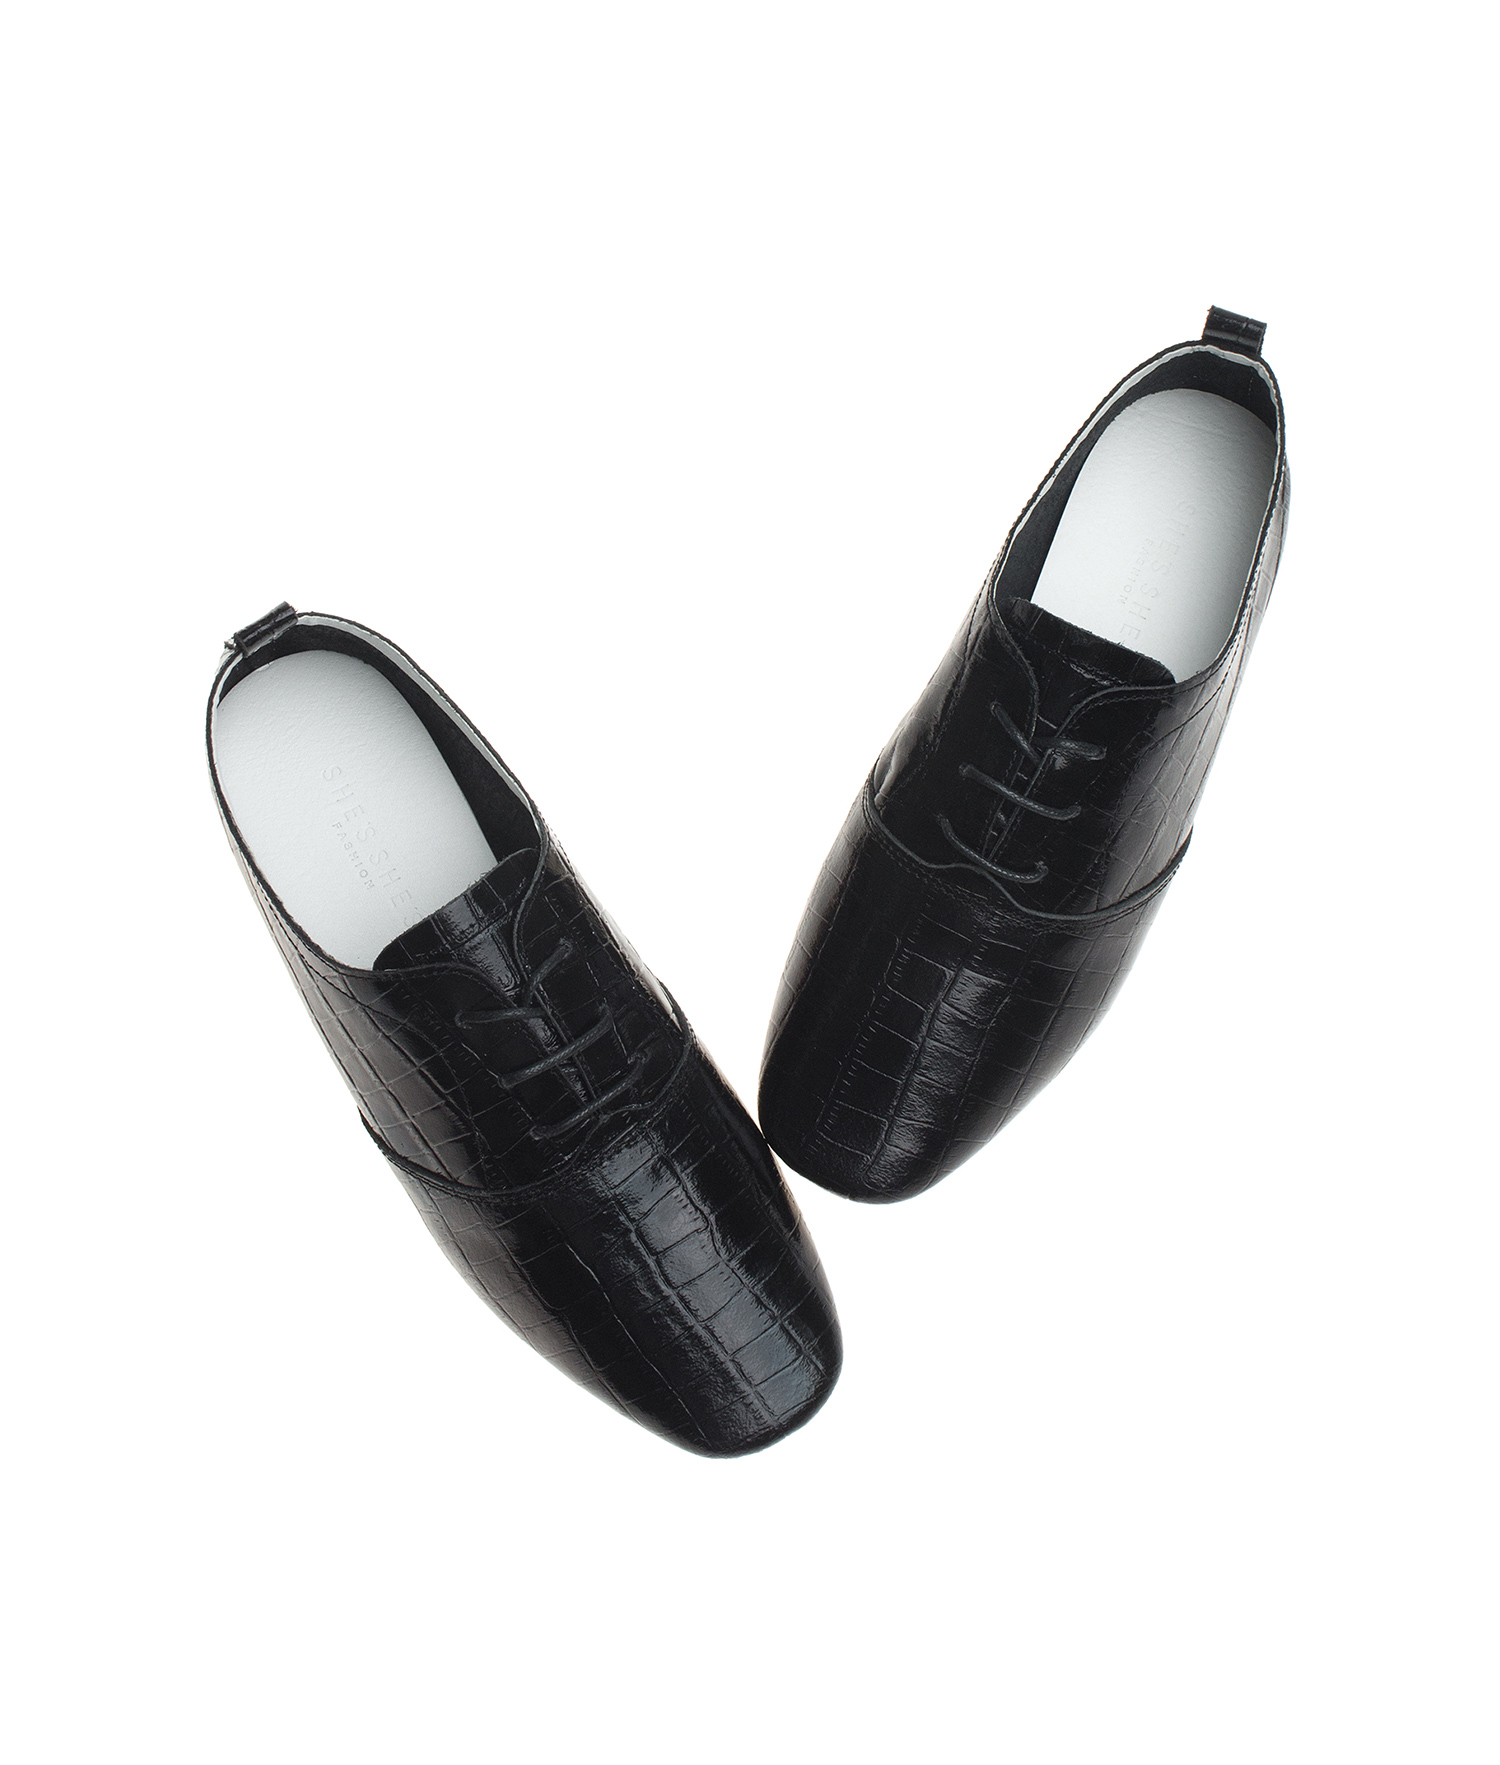 Soft Leather Oxford Driving Shoes 